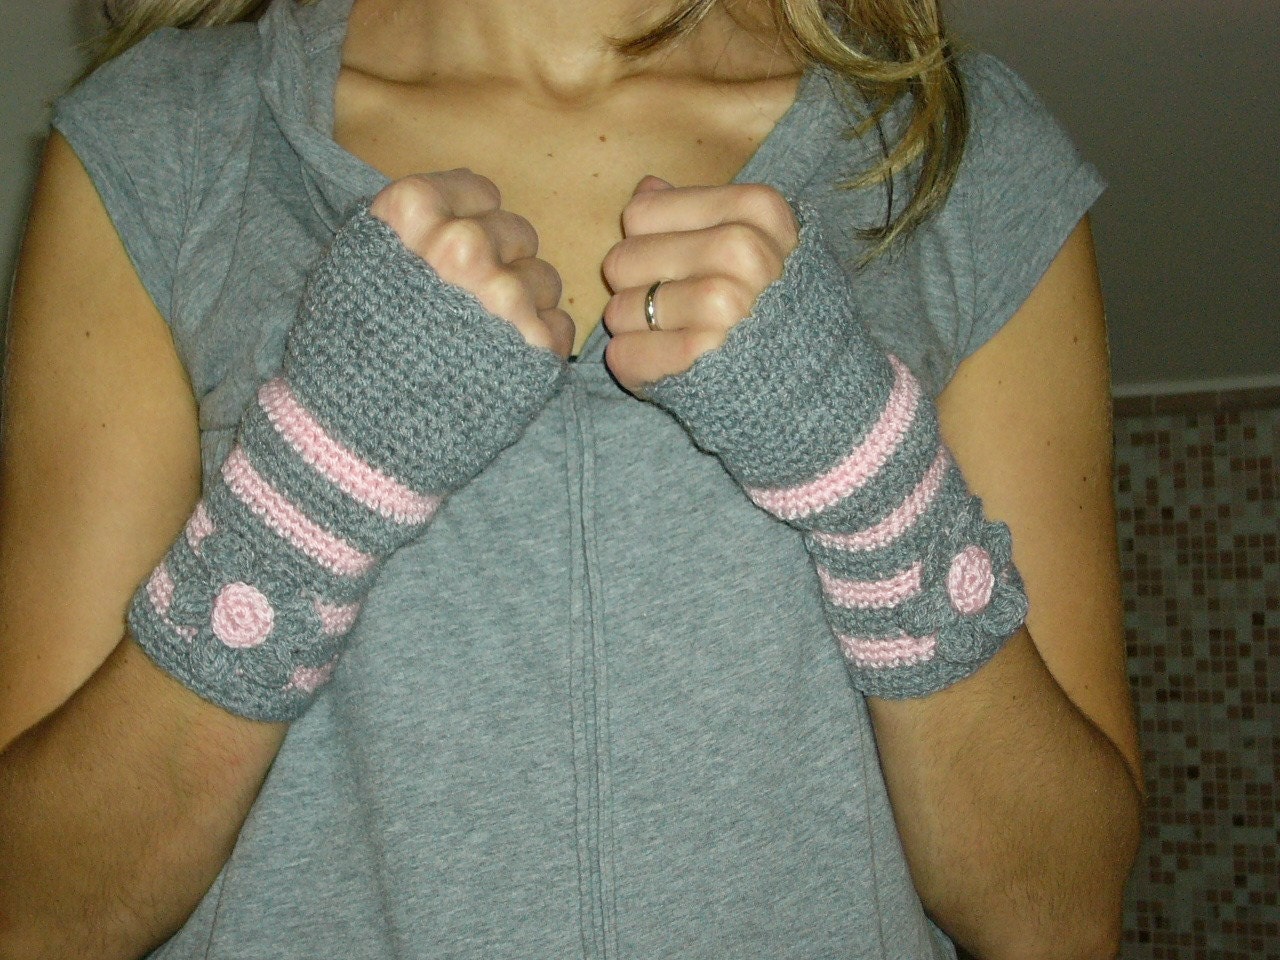 Knitting Pattern Central - Free Arm Warmers Knitting Pattern Link